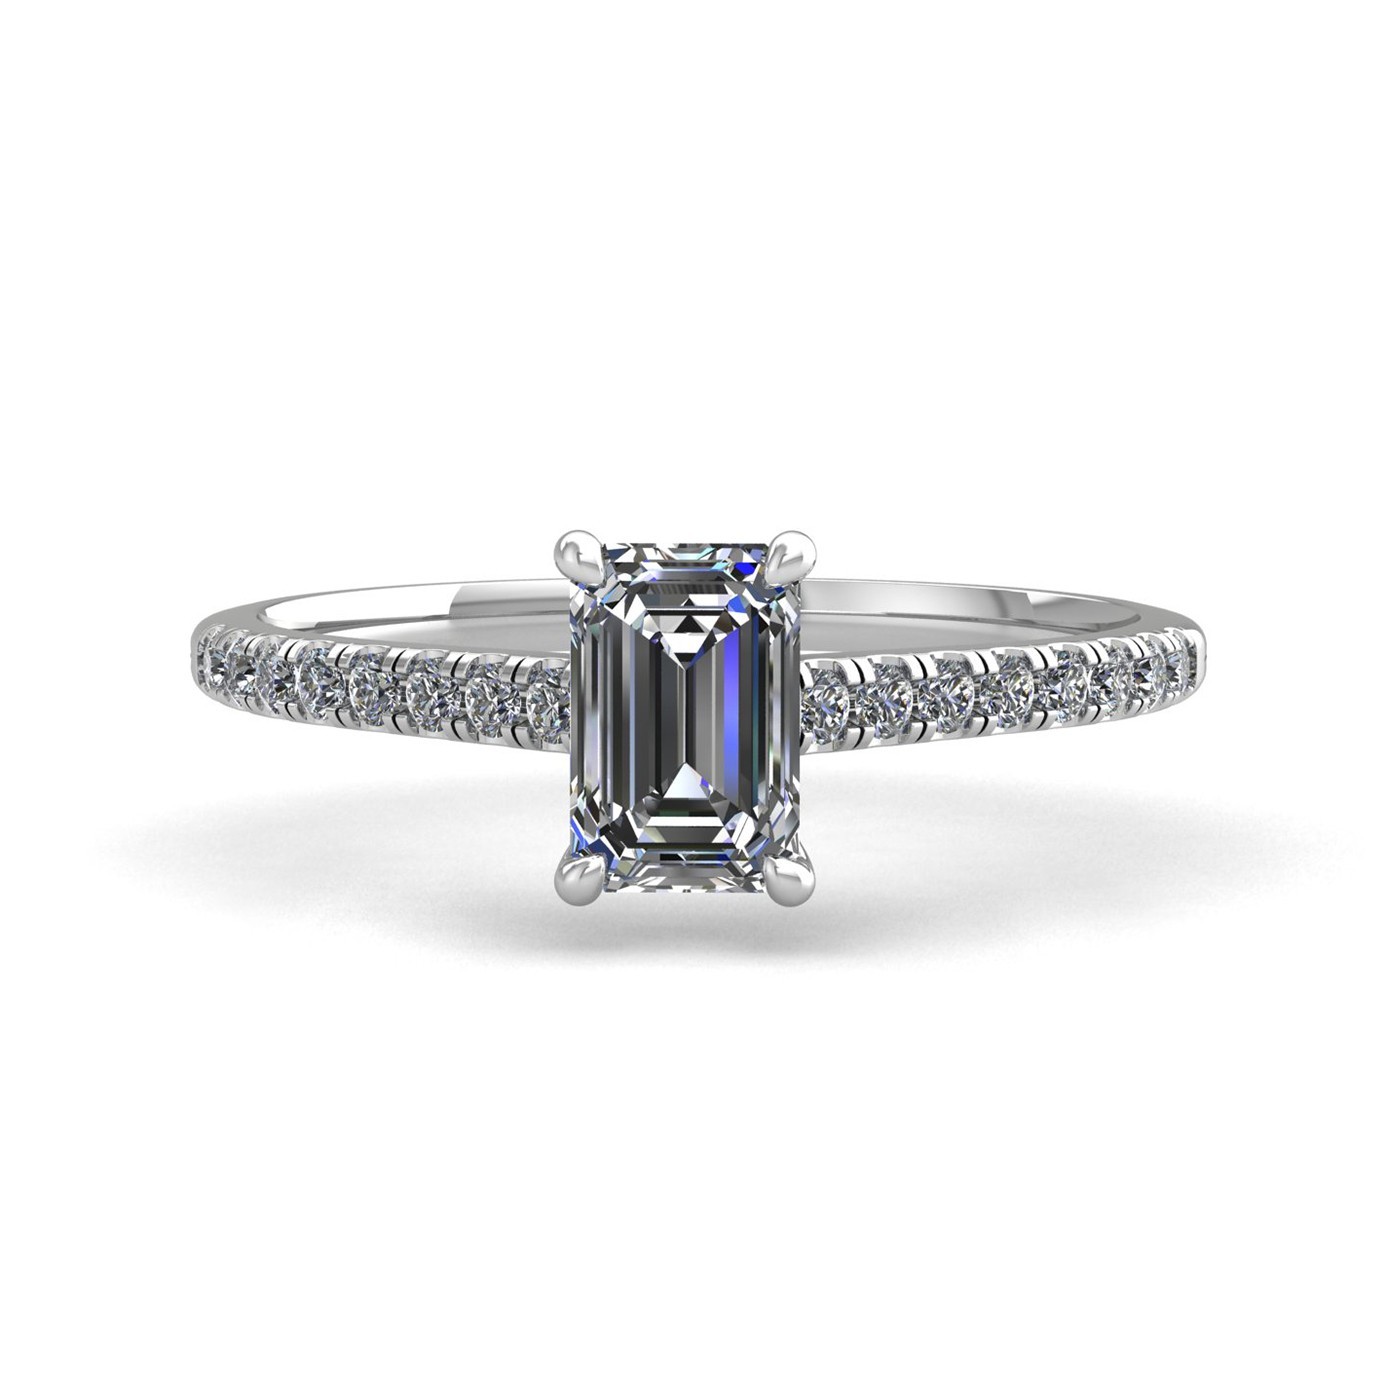 18k white gold  0,80 ct 4 prongs emerald cut diamond engagement ring with whisper thin pavÉ set band Photos & images